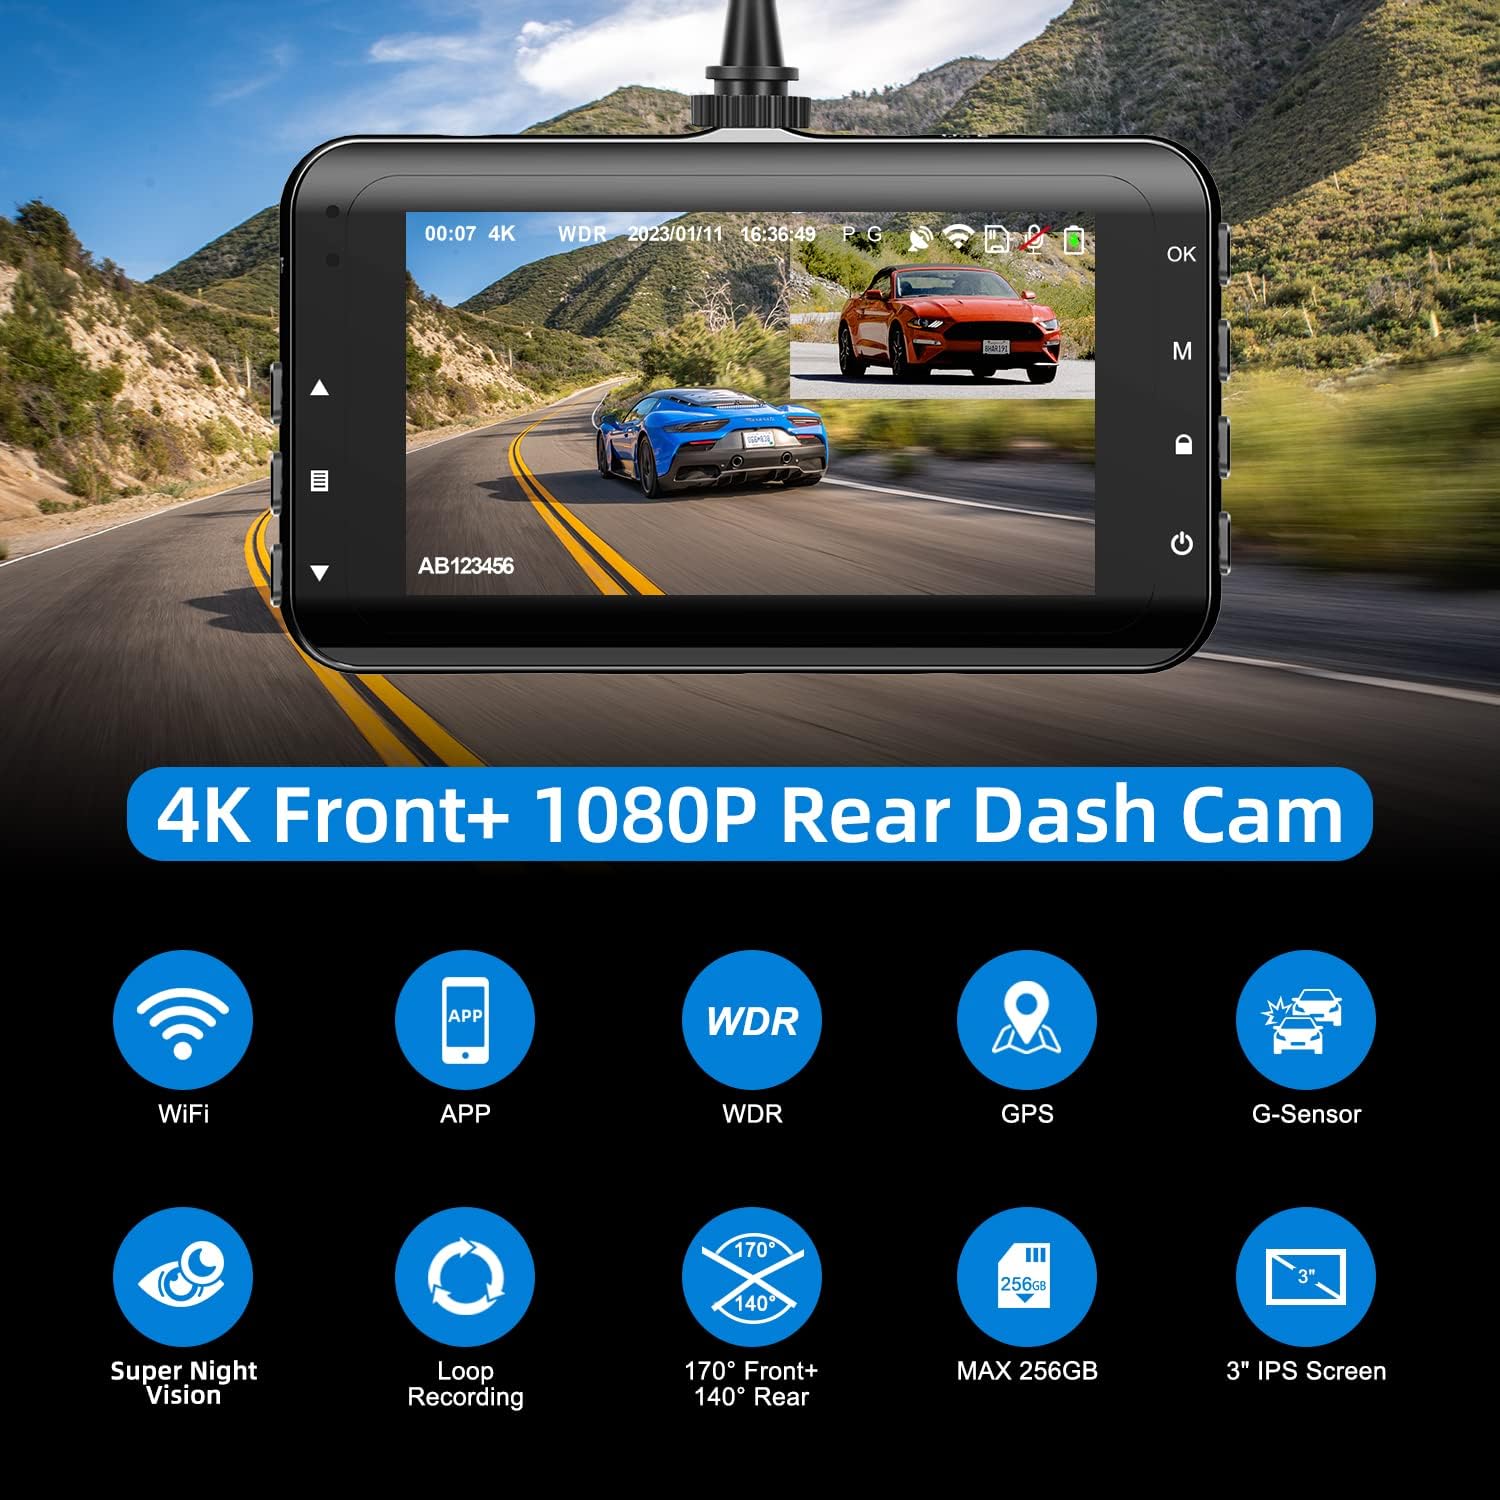 4K Dash Cam Front and Rear(1080P FHD) with GPS  WiFi, Dual Dashcam for Car with Super Night Vision, Parking Mode, 64G SD Card, 170° Wide Angle, G-Sensor,3 IPS Display, APP Control, Support 256GB Max